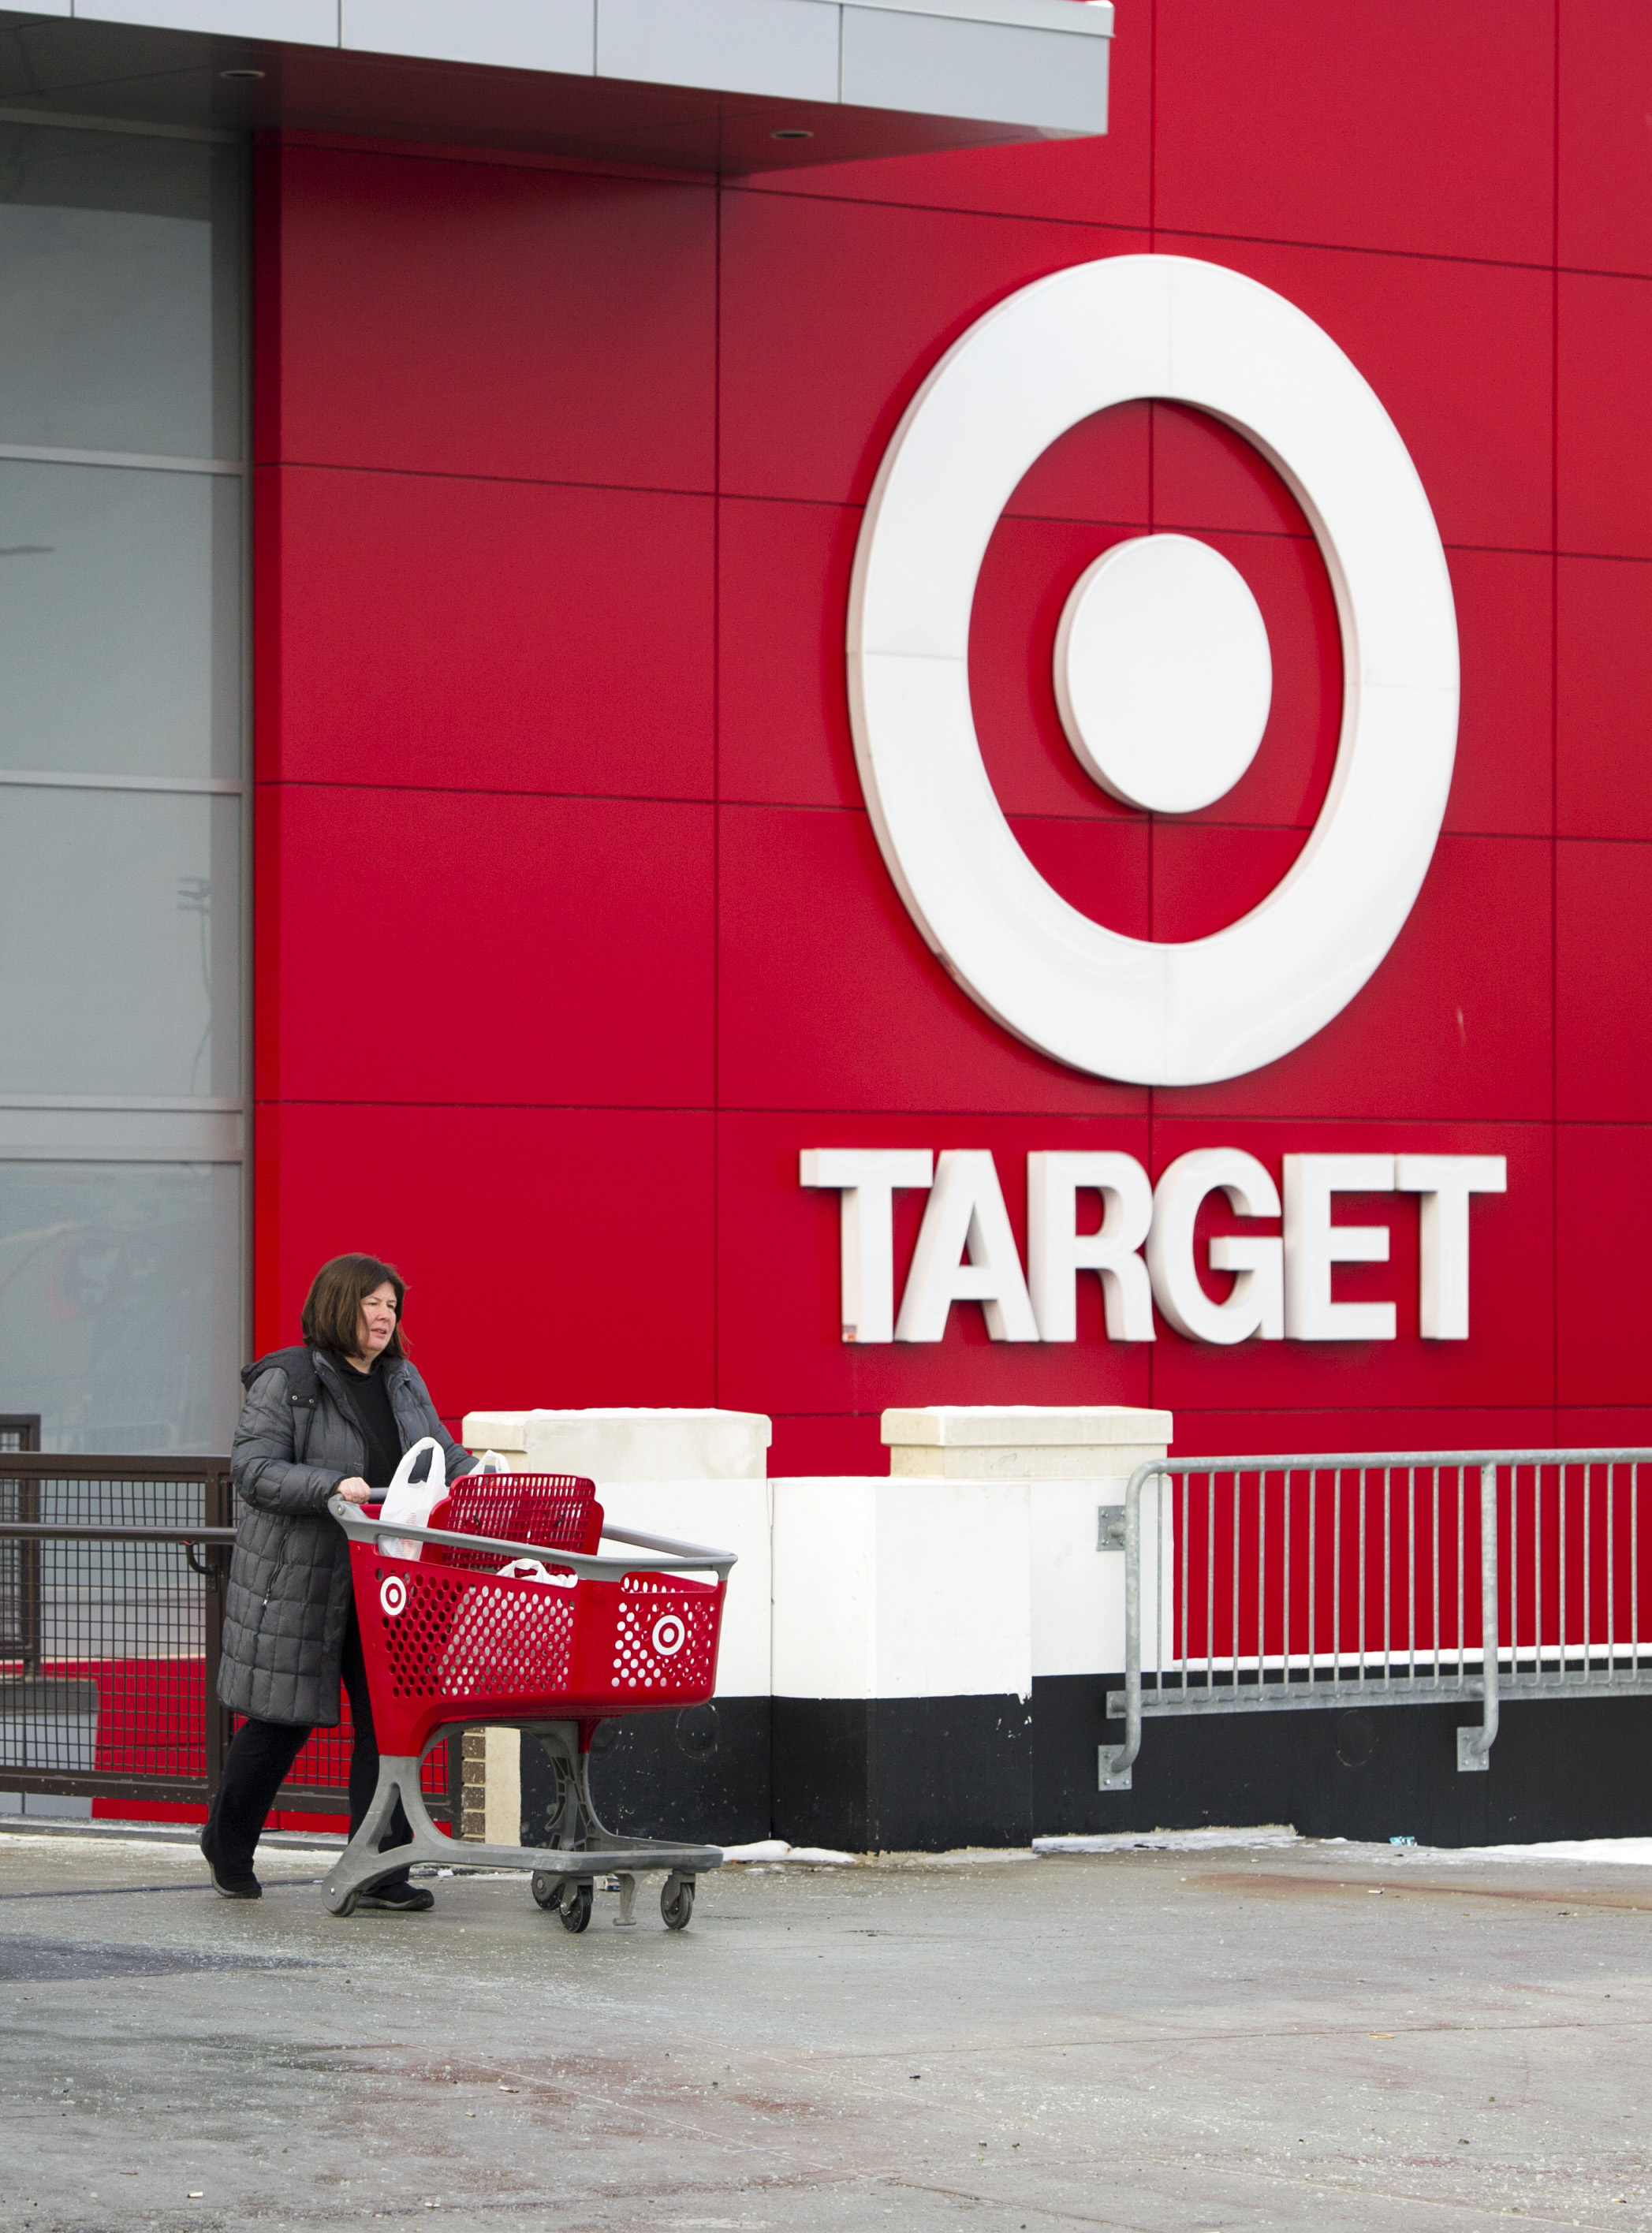 Shopper Laura Steele leaves a Target store in Toronto, Ontario, Thursday, January 15, 2015. Target announced that they will be ceasing operations in Canada affecting about 18,000 jobs. (Photo by Kevin Van Paassen Bloomberg)